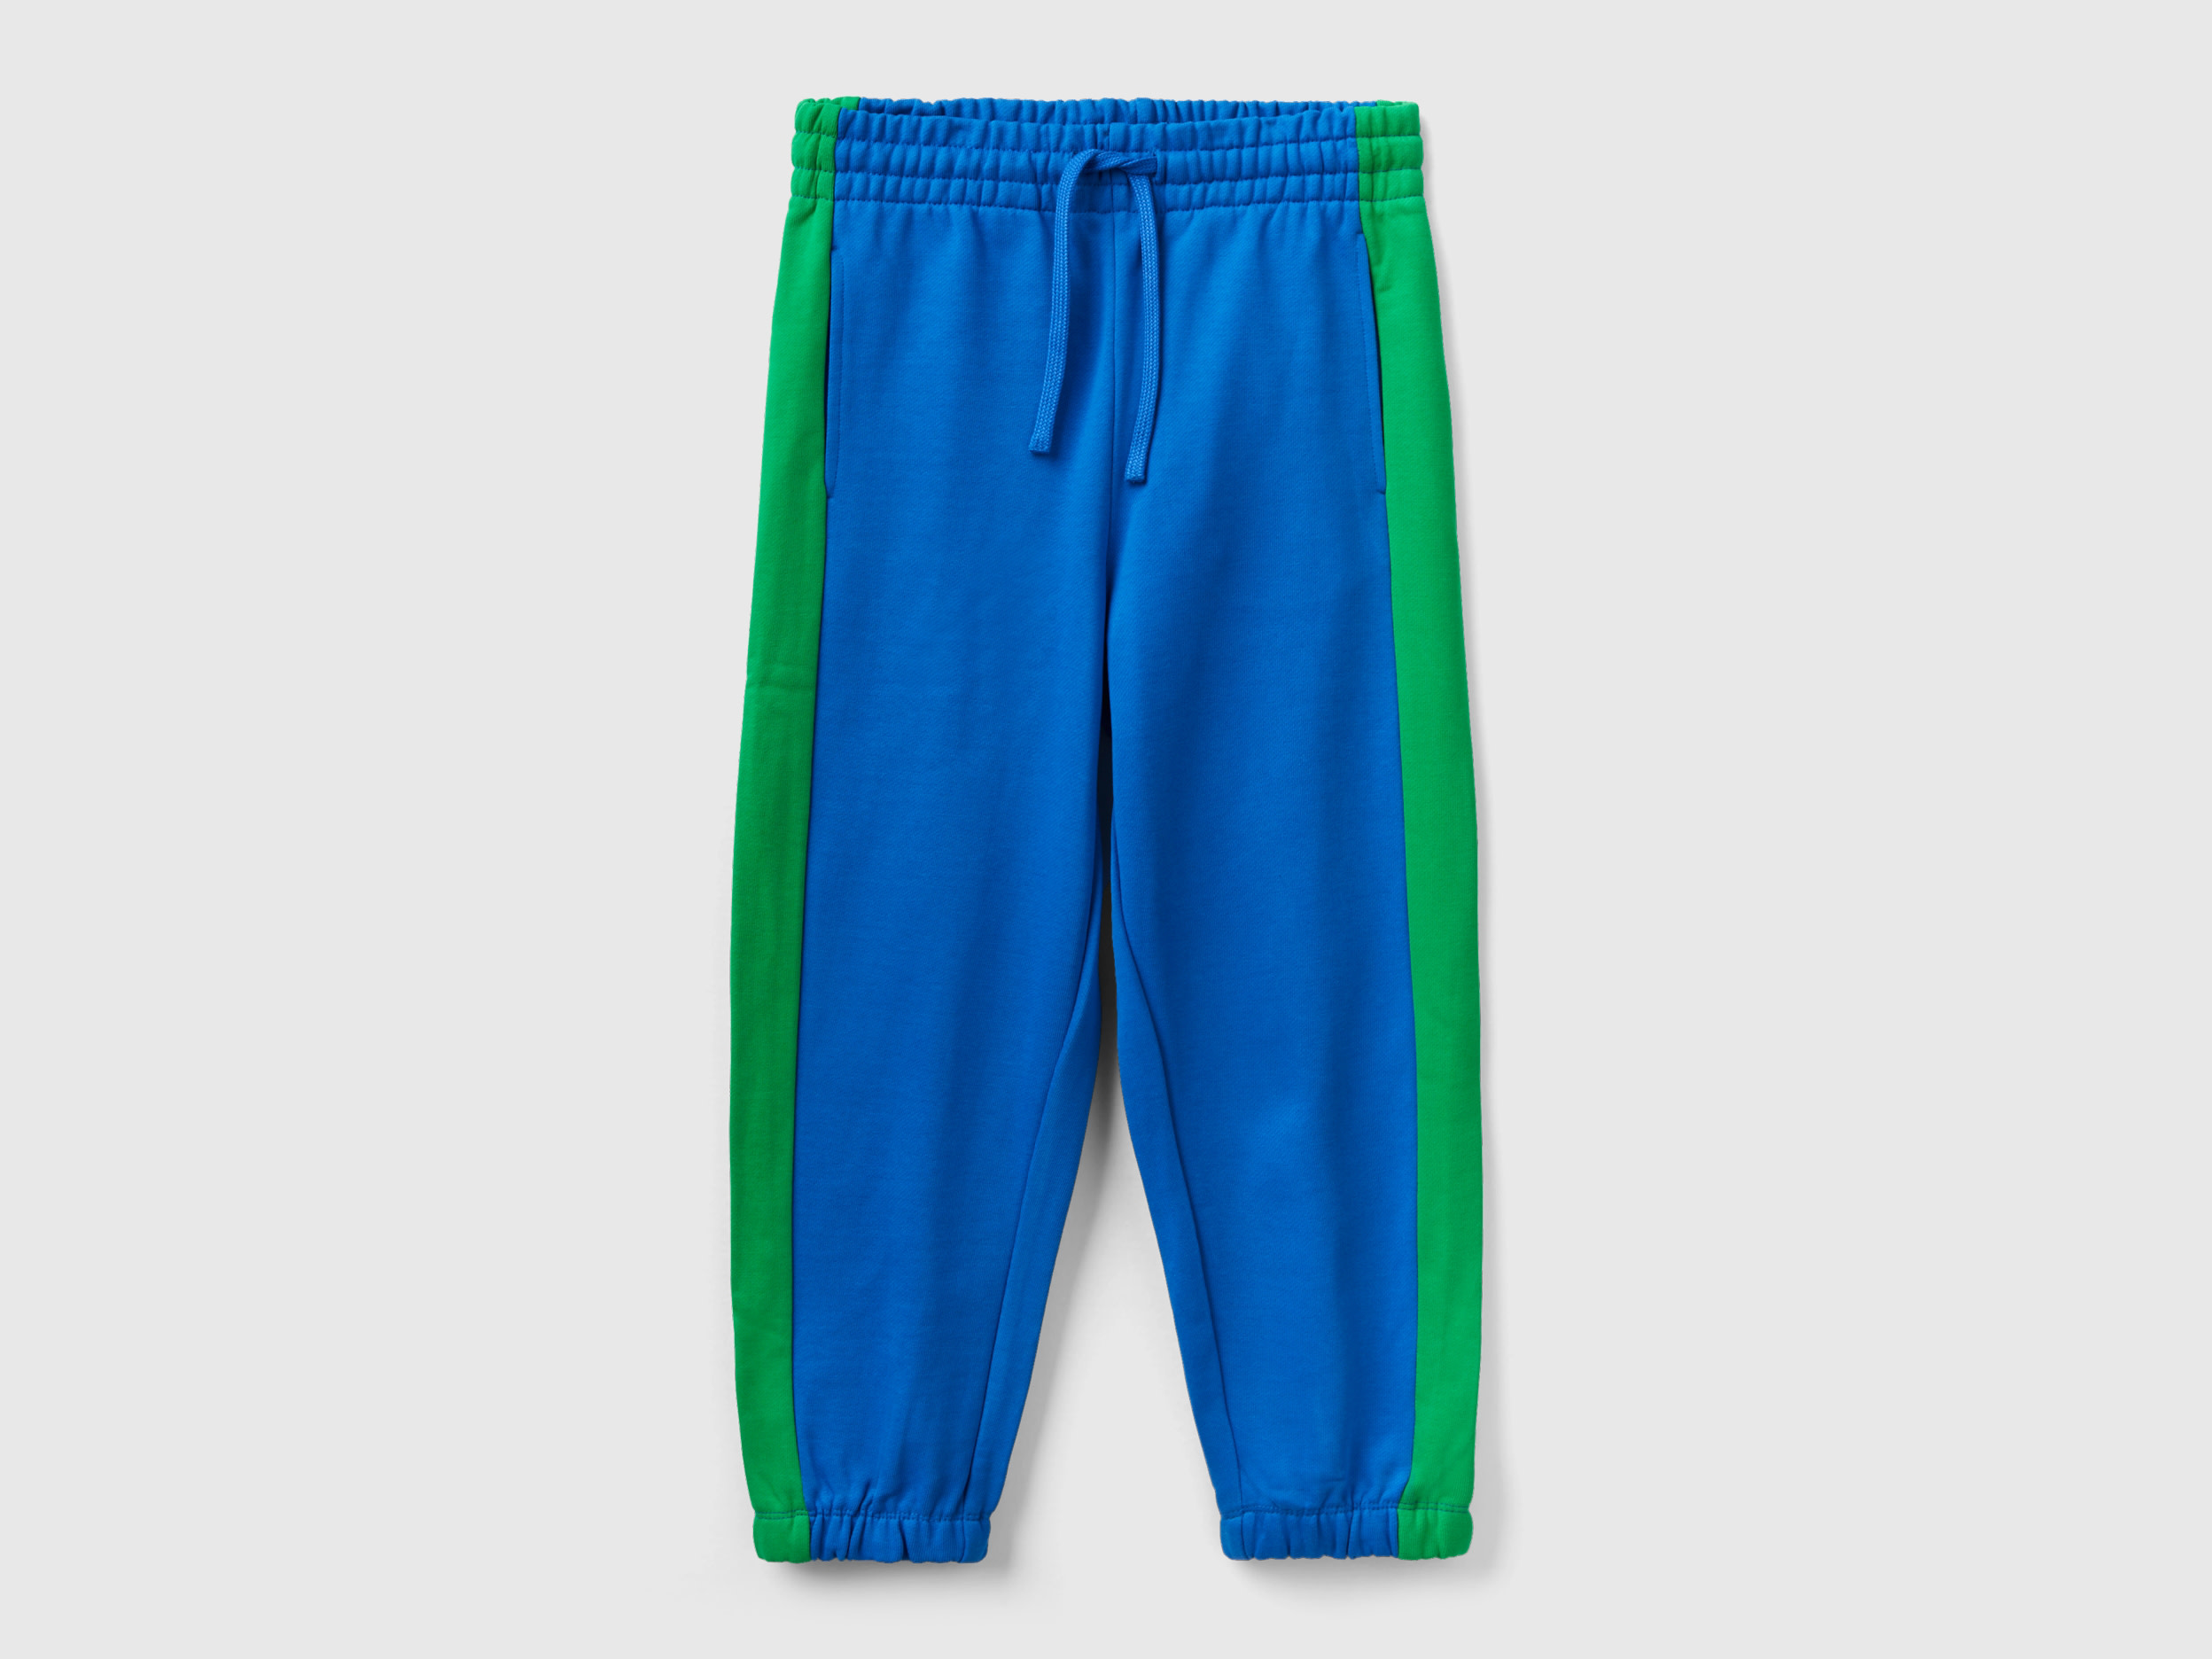 Benetton, Balloon Fit Joggers With Side Bands, size M, Bright Blue, Kids